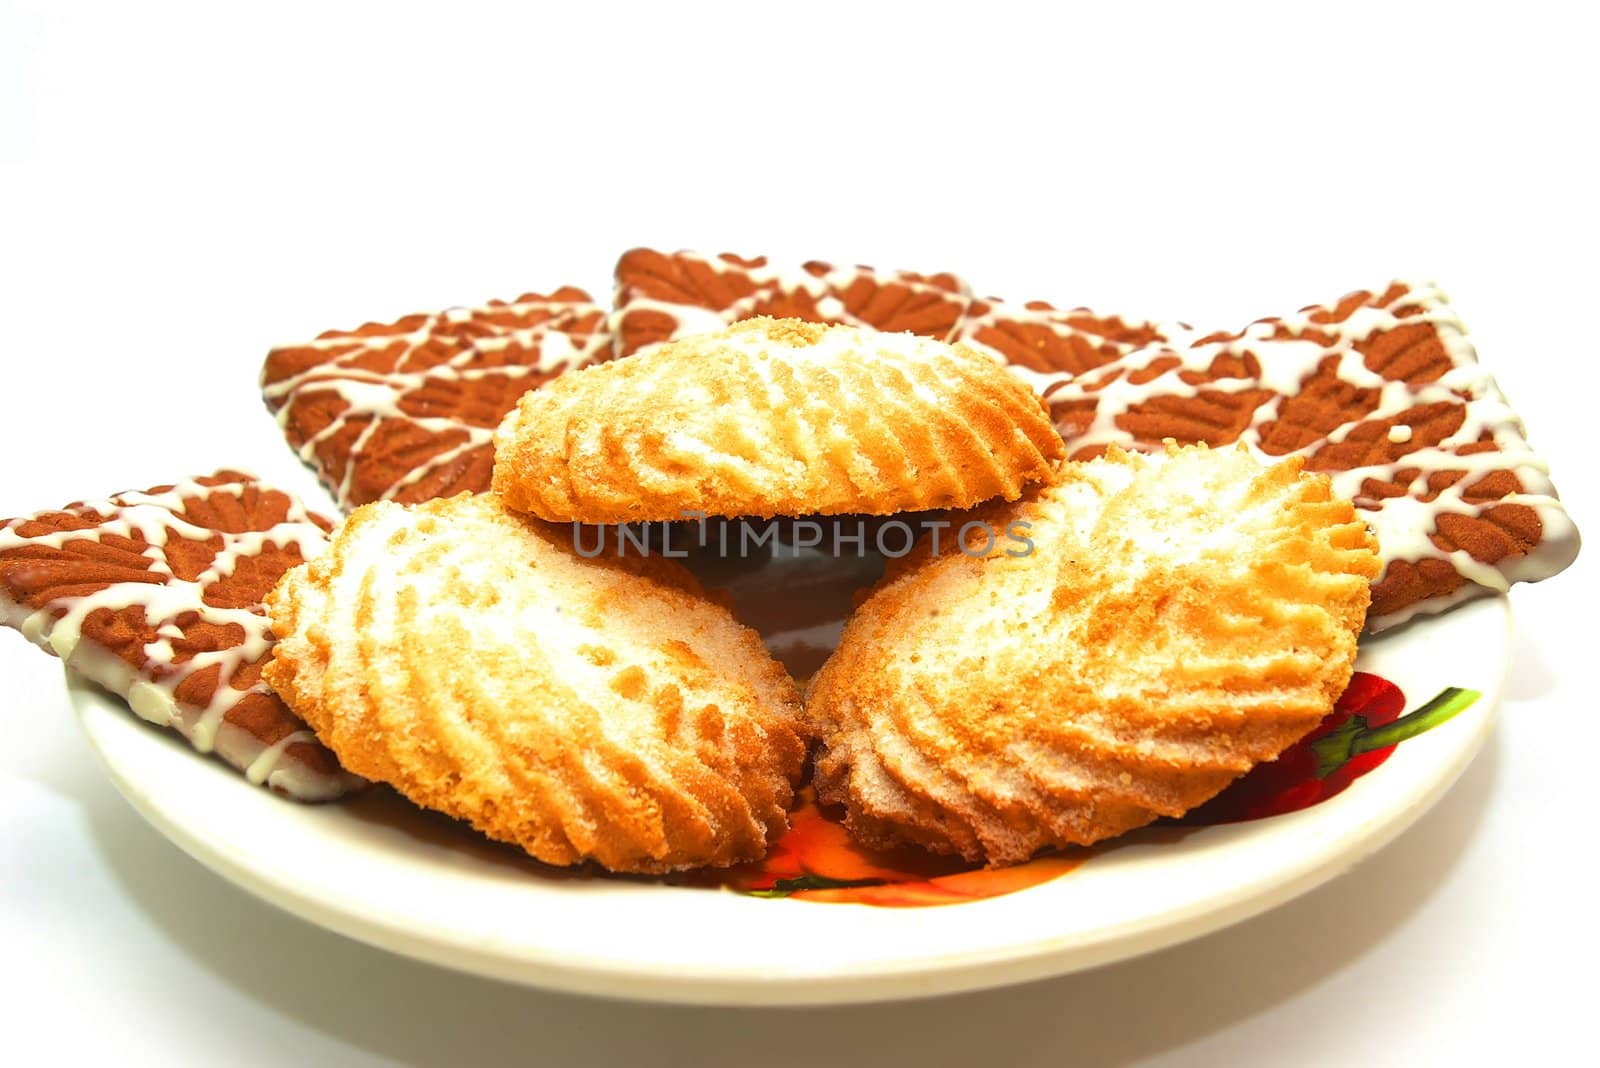 Photo of the plate with cookies on white background
